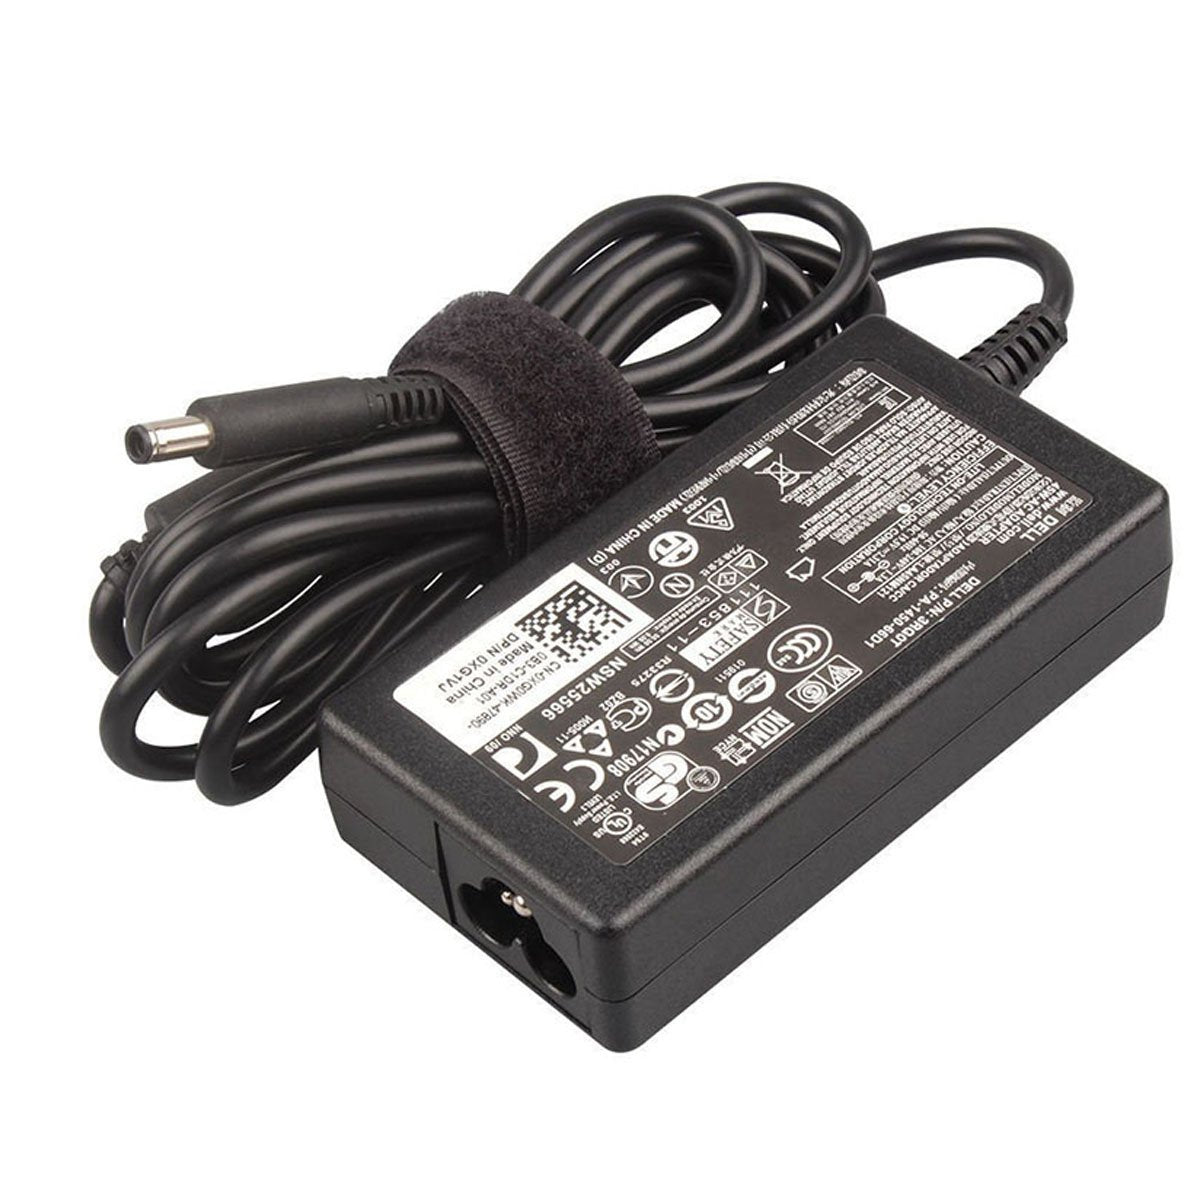 Dell XPS 12 9Q33 Original 45W Laptop Charger Adapter With Power Cord 19.5V 4.5mm Pin